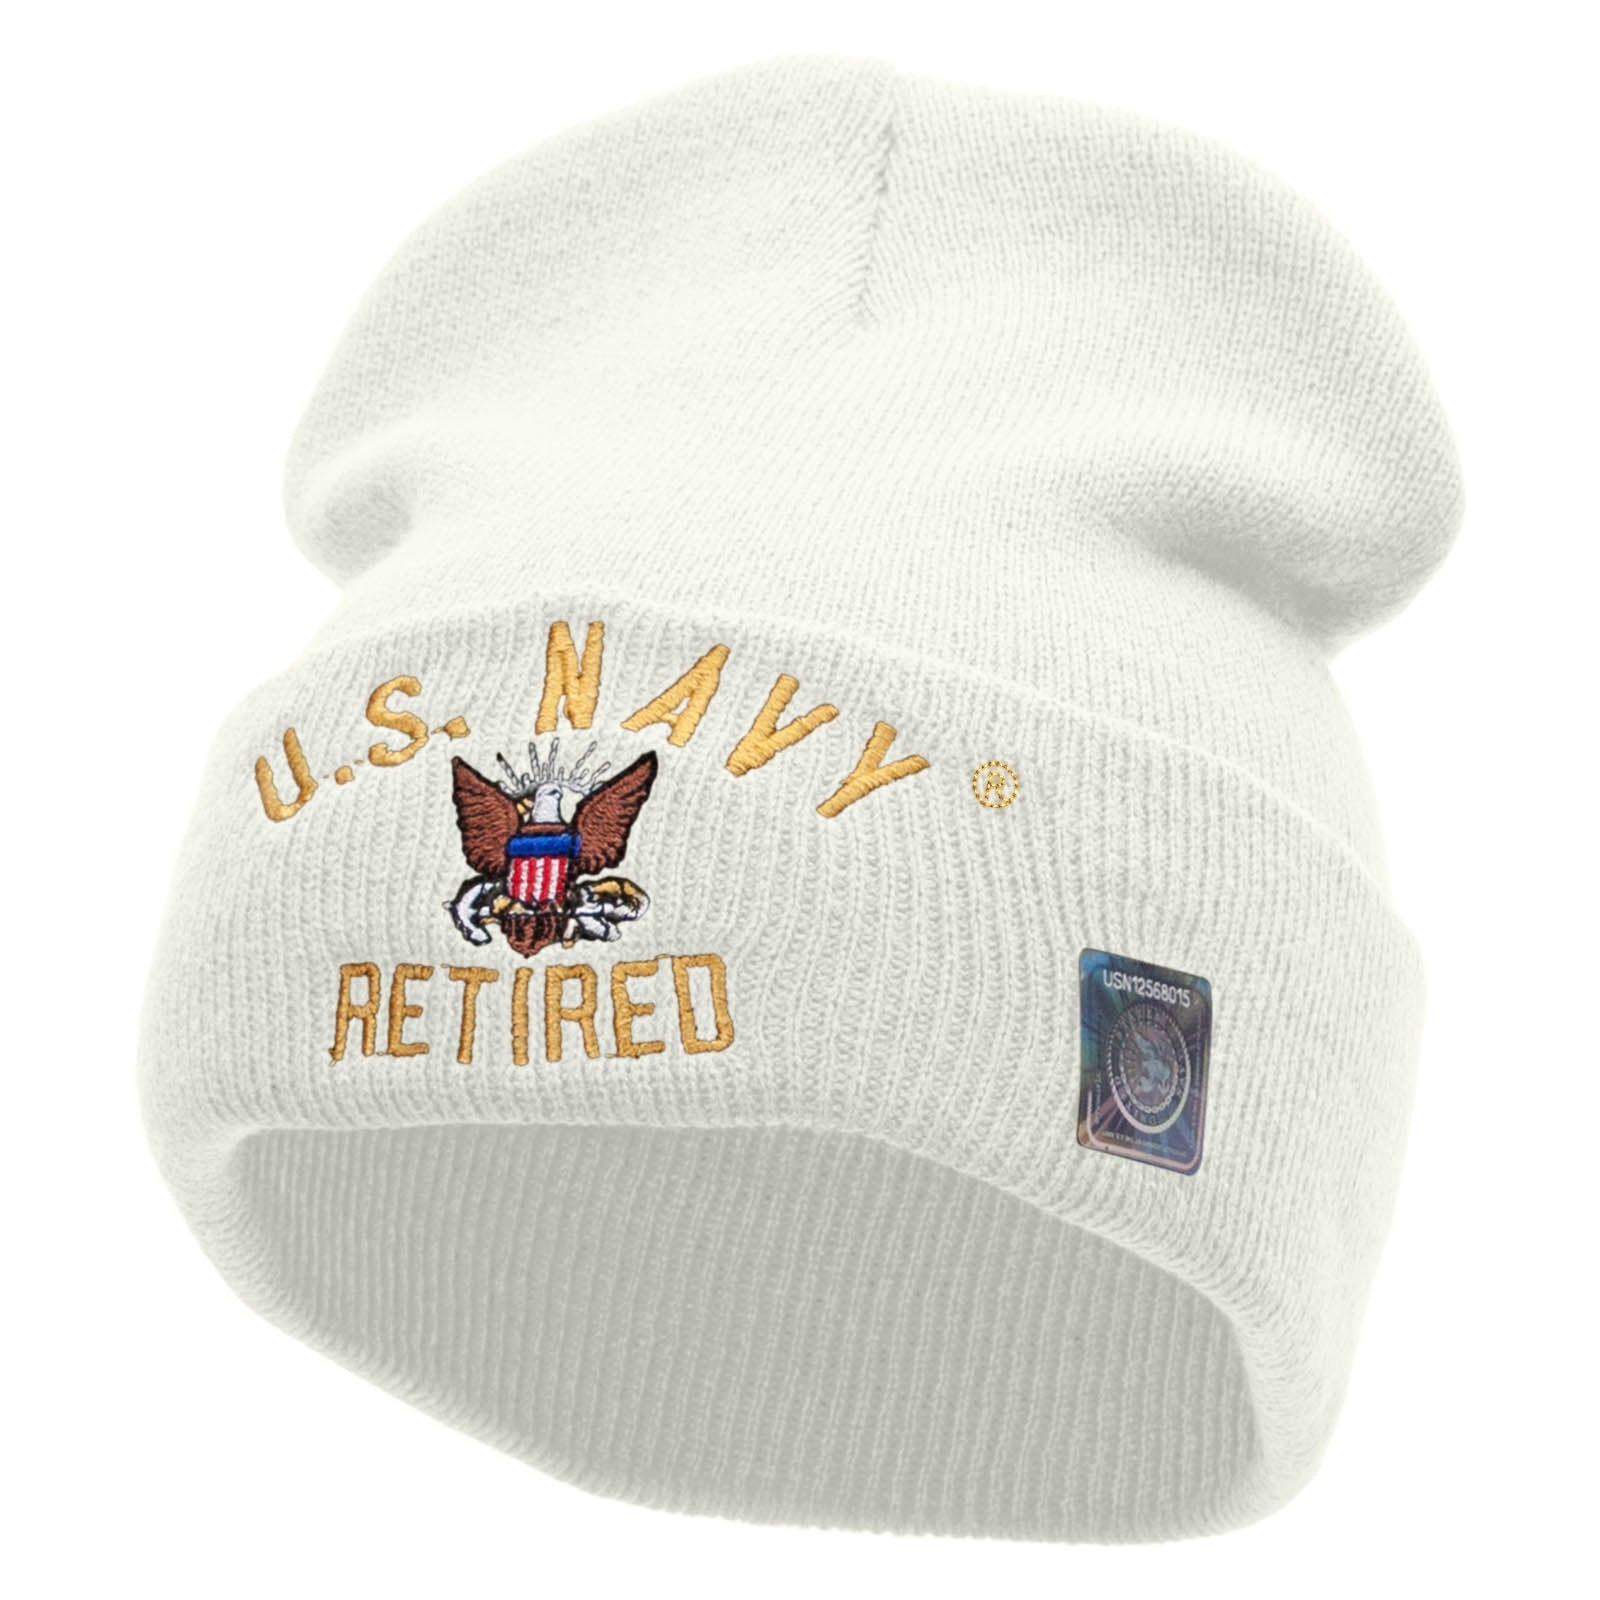 Licensed US Navy Retired Military Embroidered Long Beanie Made in USA - White OSFM